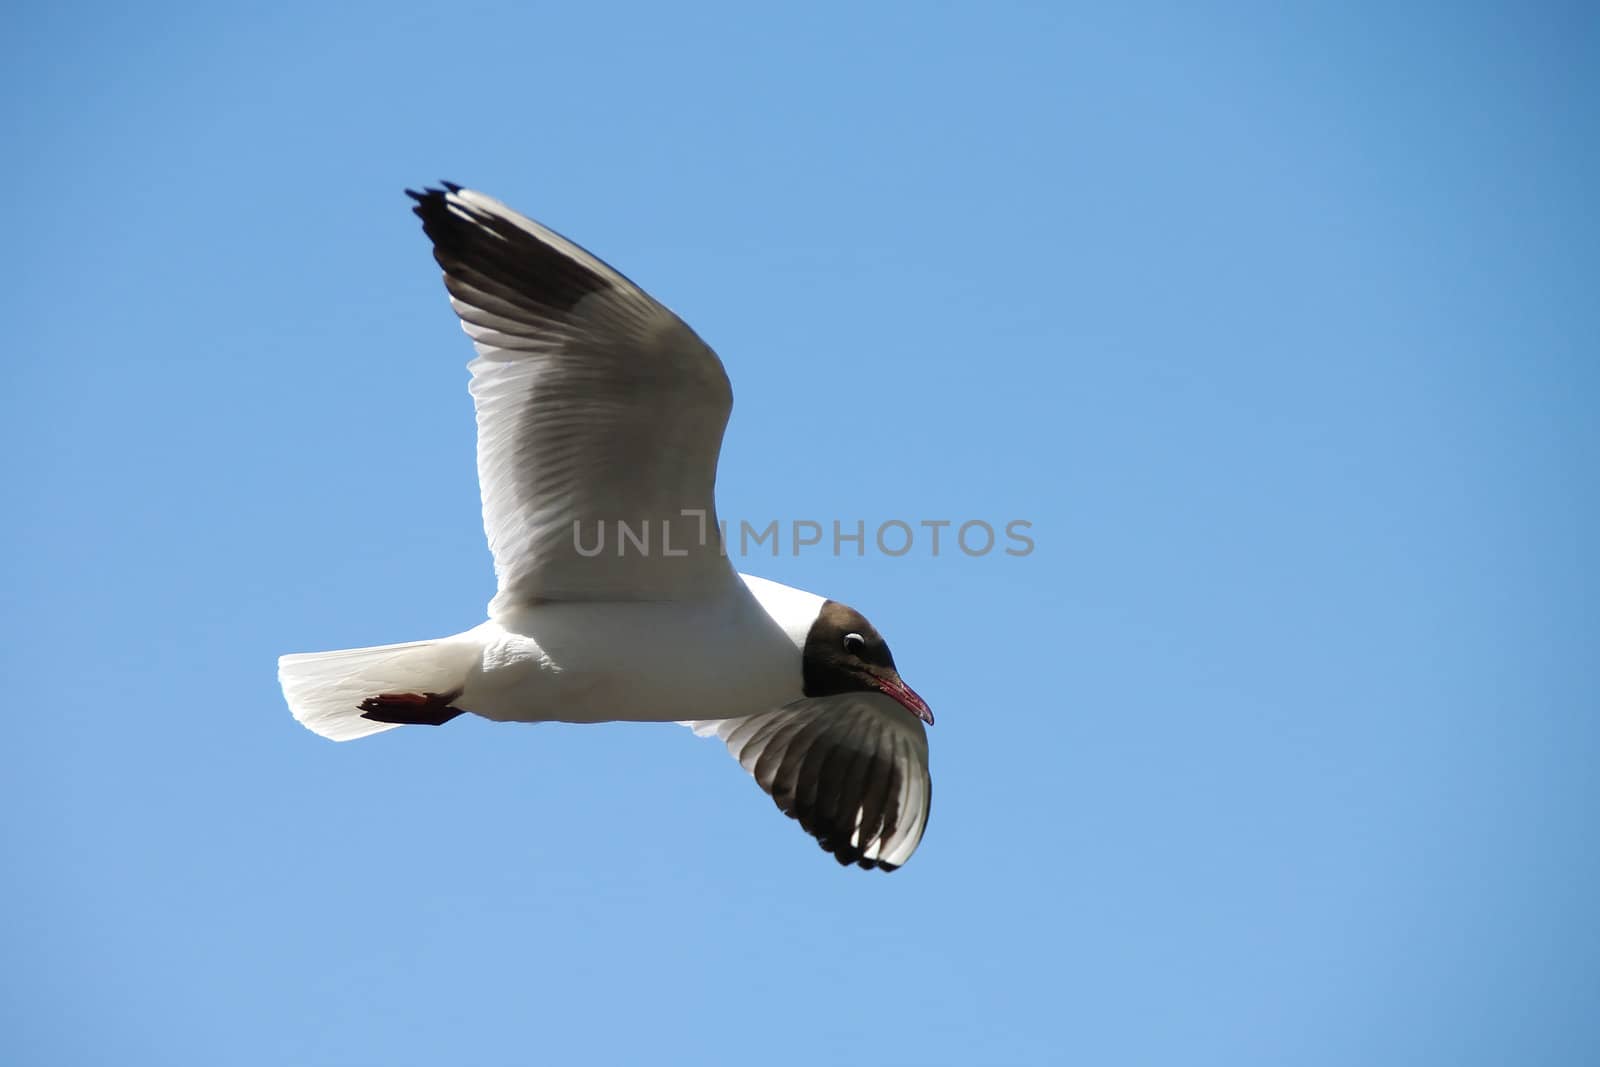 Lonely seagull flying in a blue sky